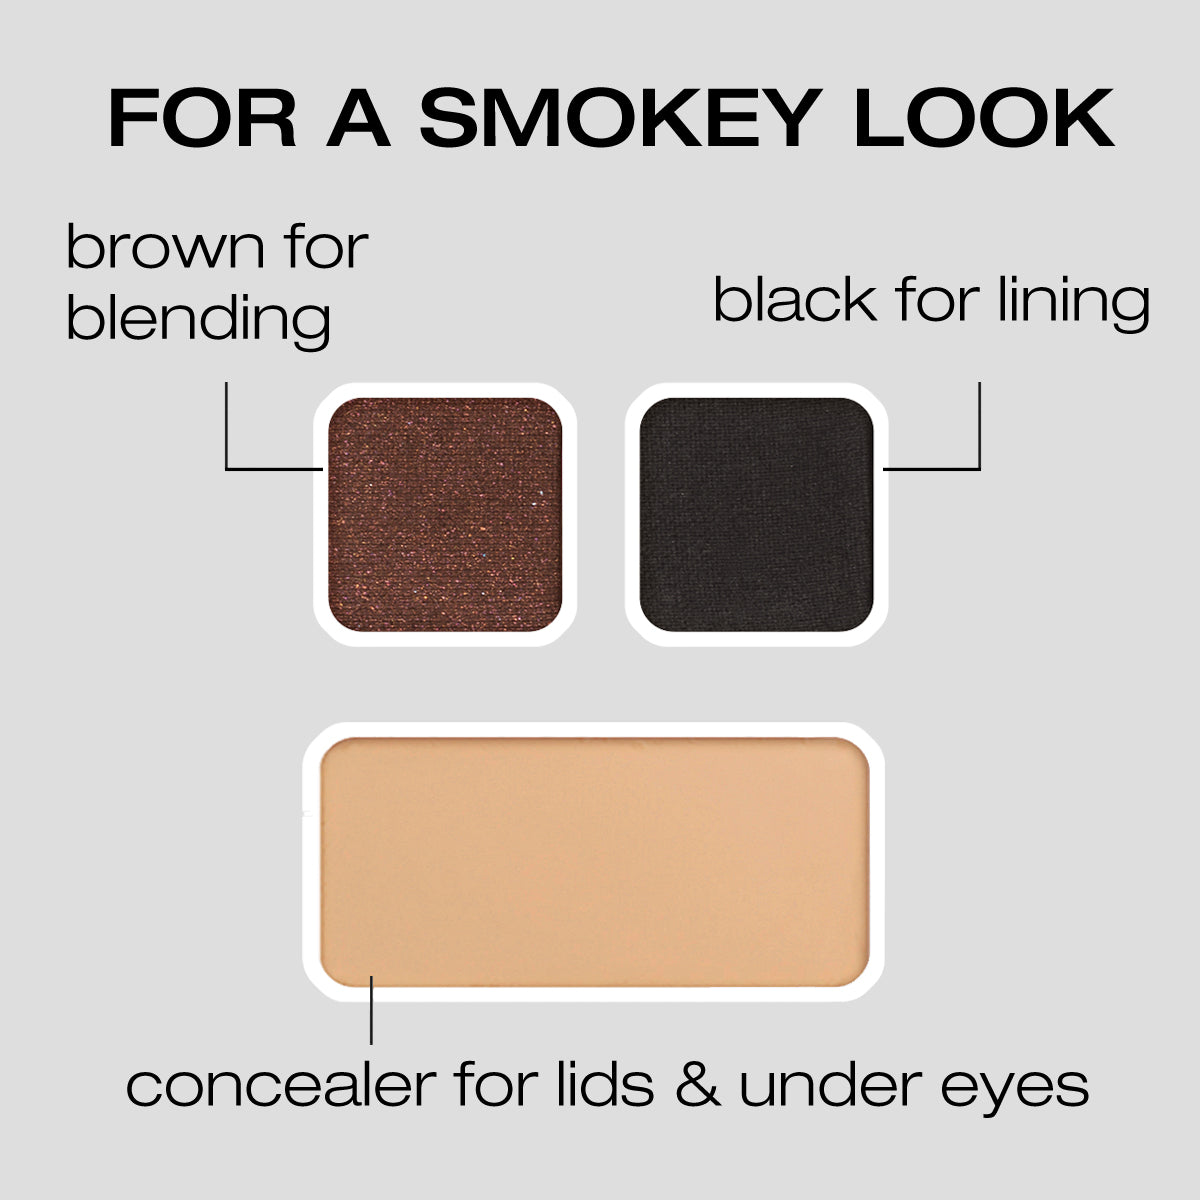 For a Smokey Look: Brown for blending, black for lining, concealer for lids & Under eyes